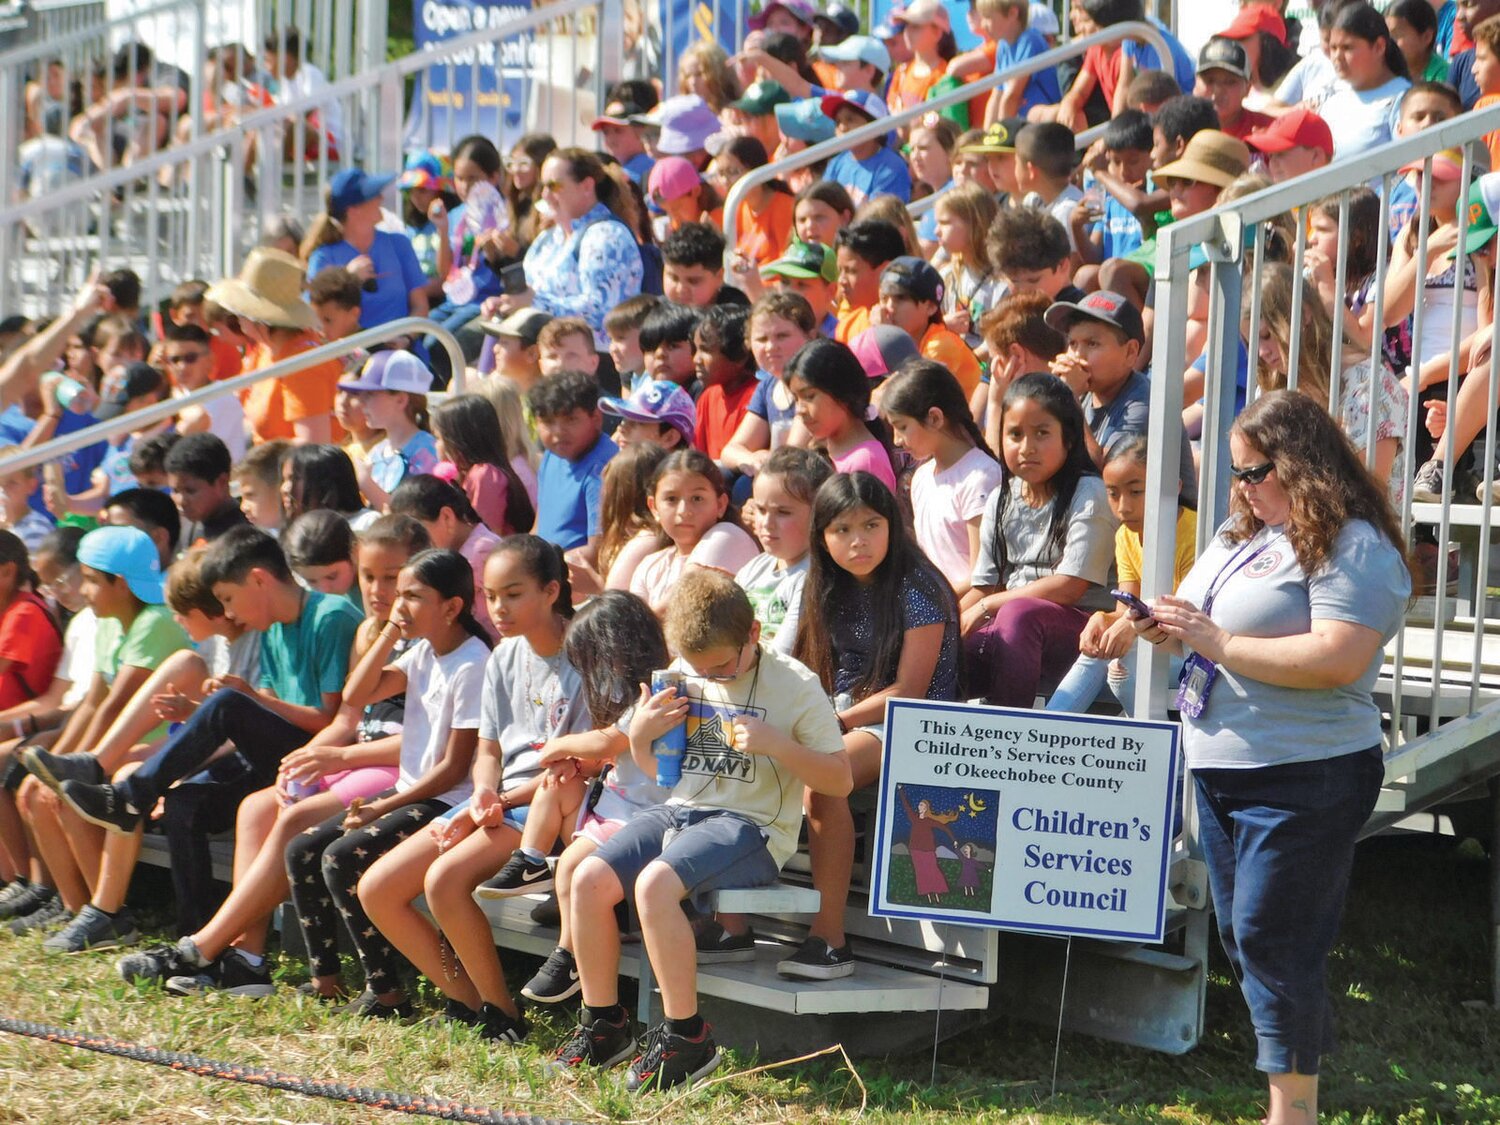 Crowd of children at a previous Battle of Okeechobee Re-enactment.